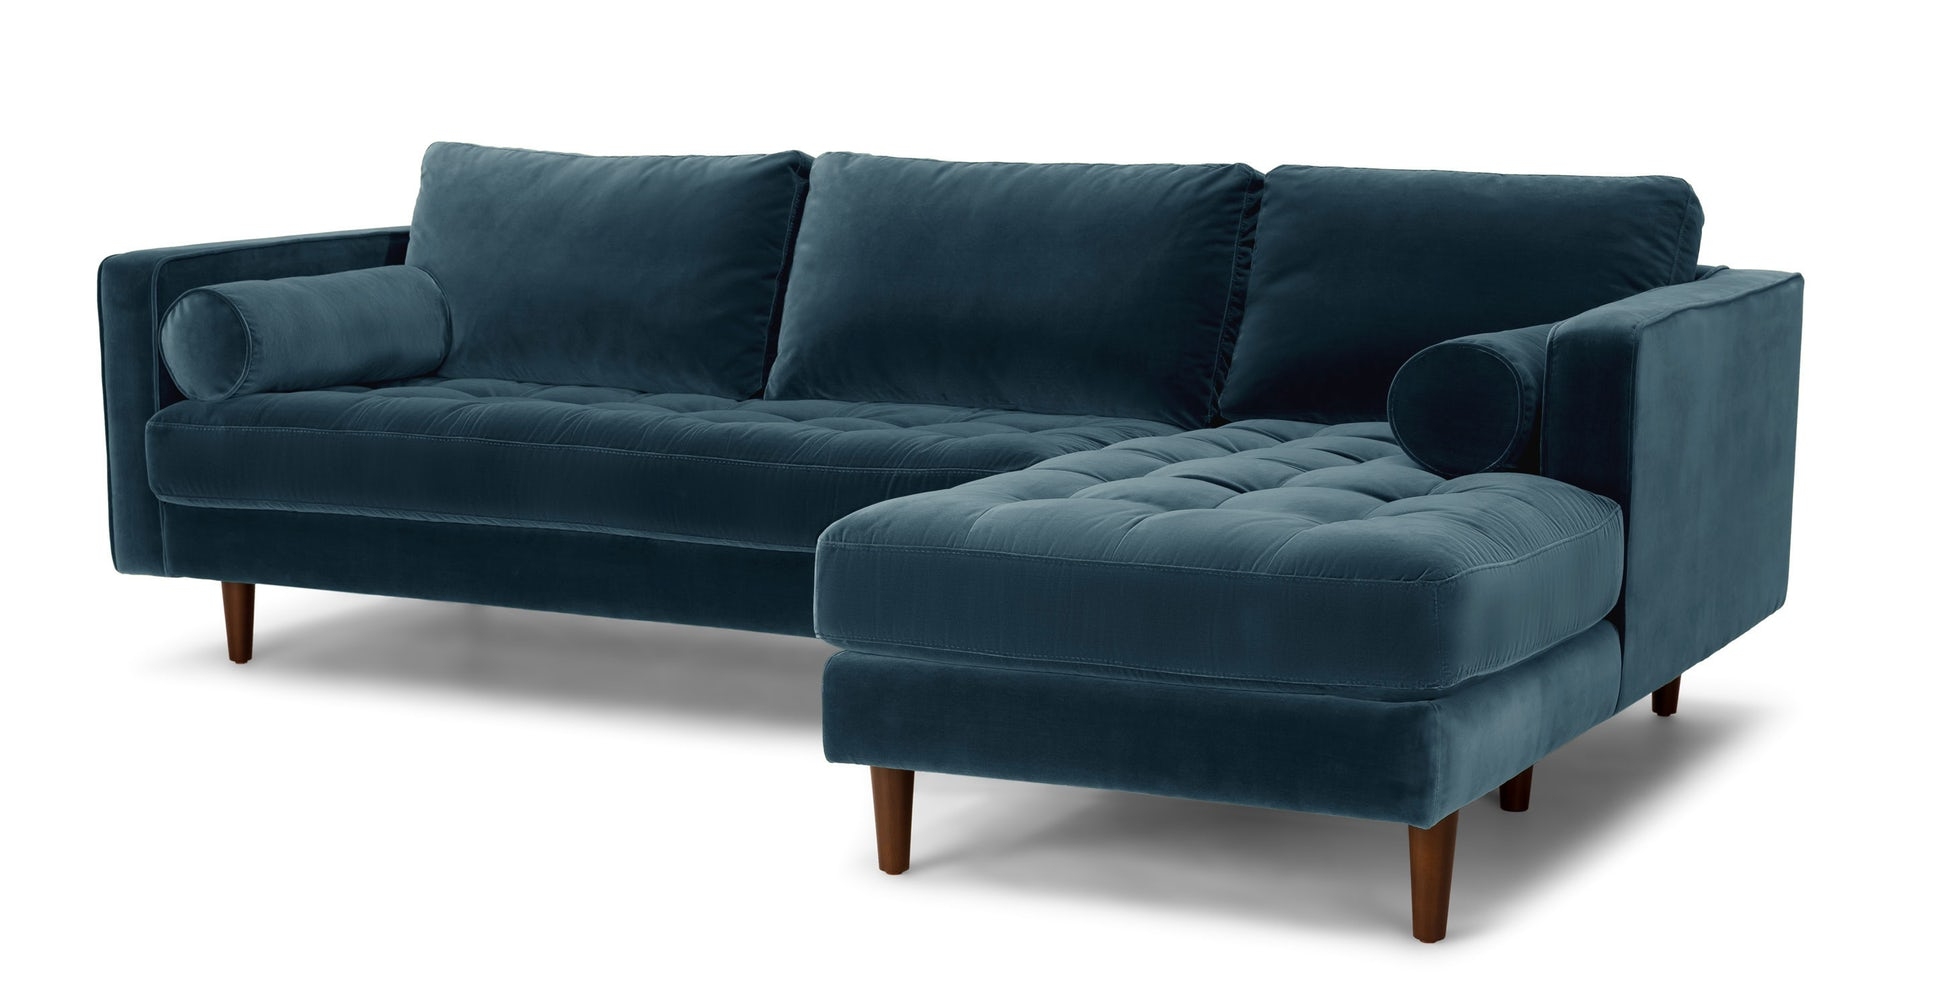 Sven Right Sectional Sofa, Pacific Blue - Image 3